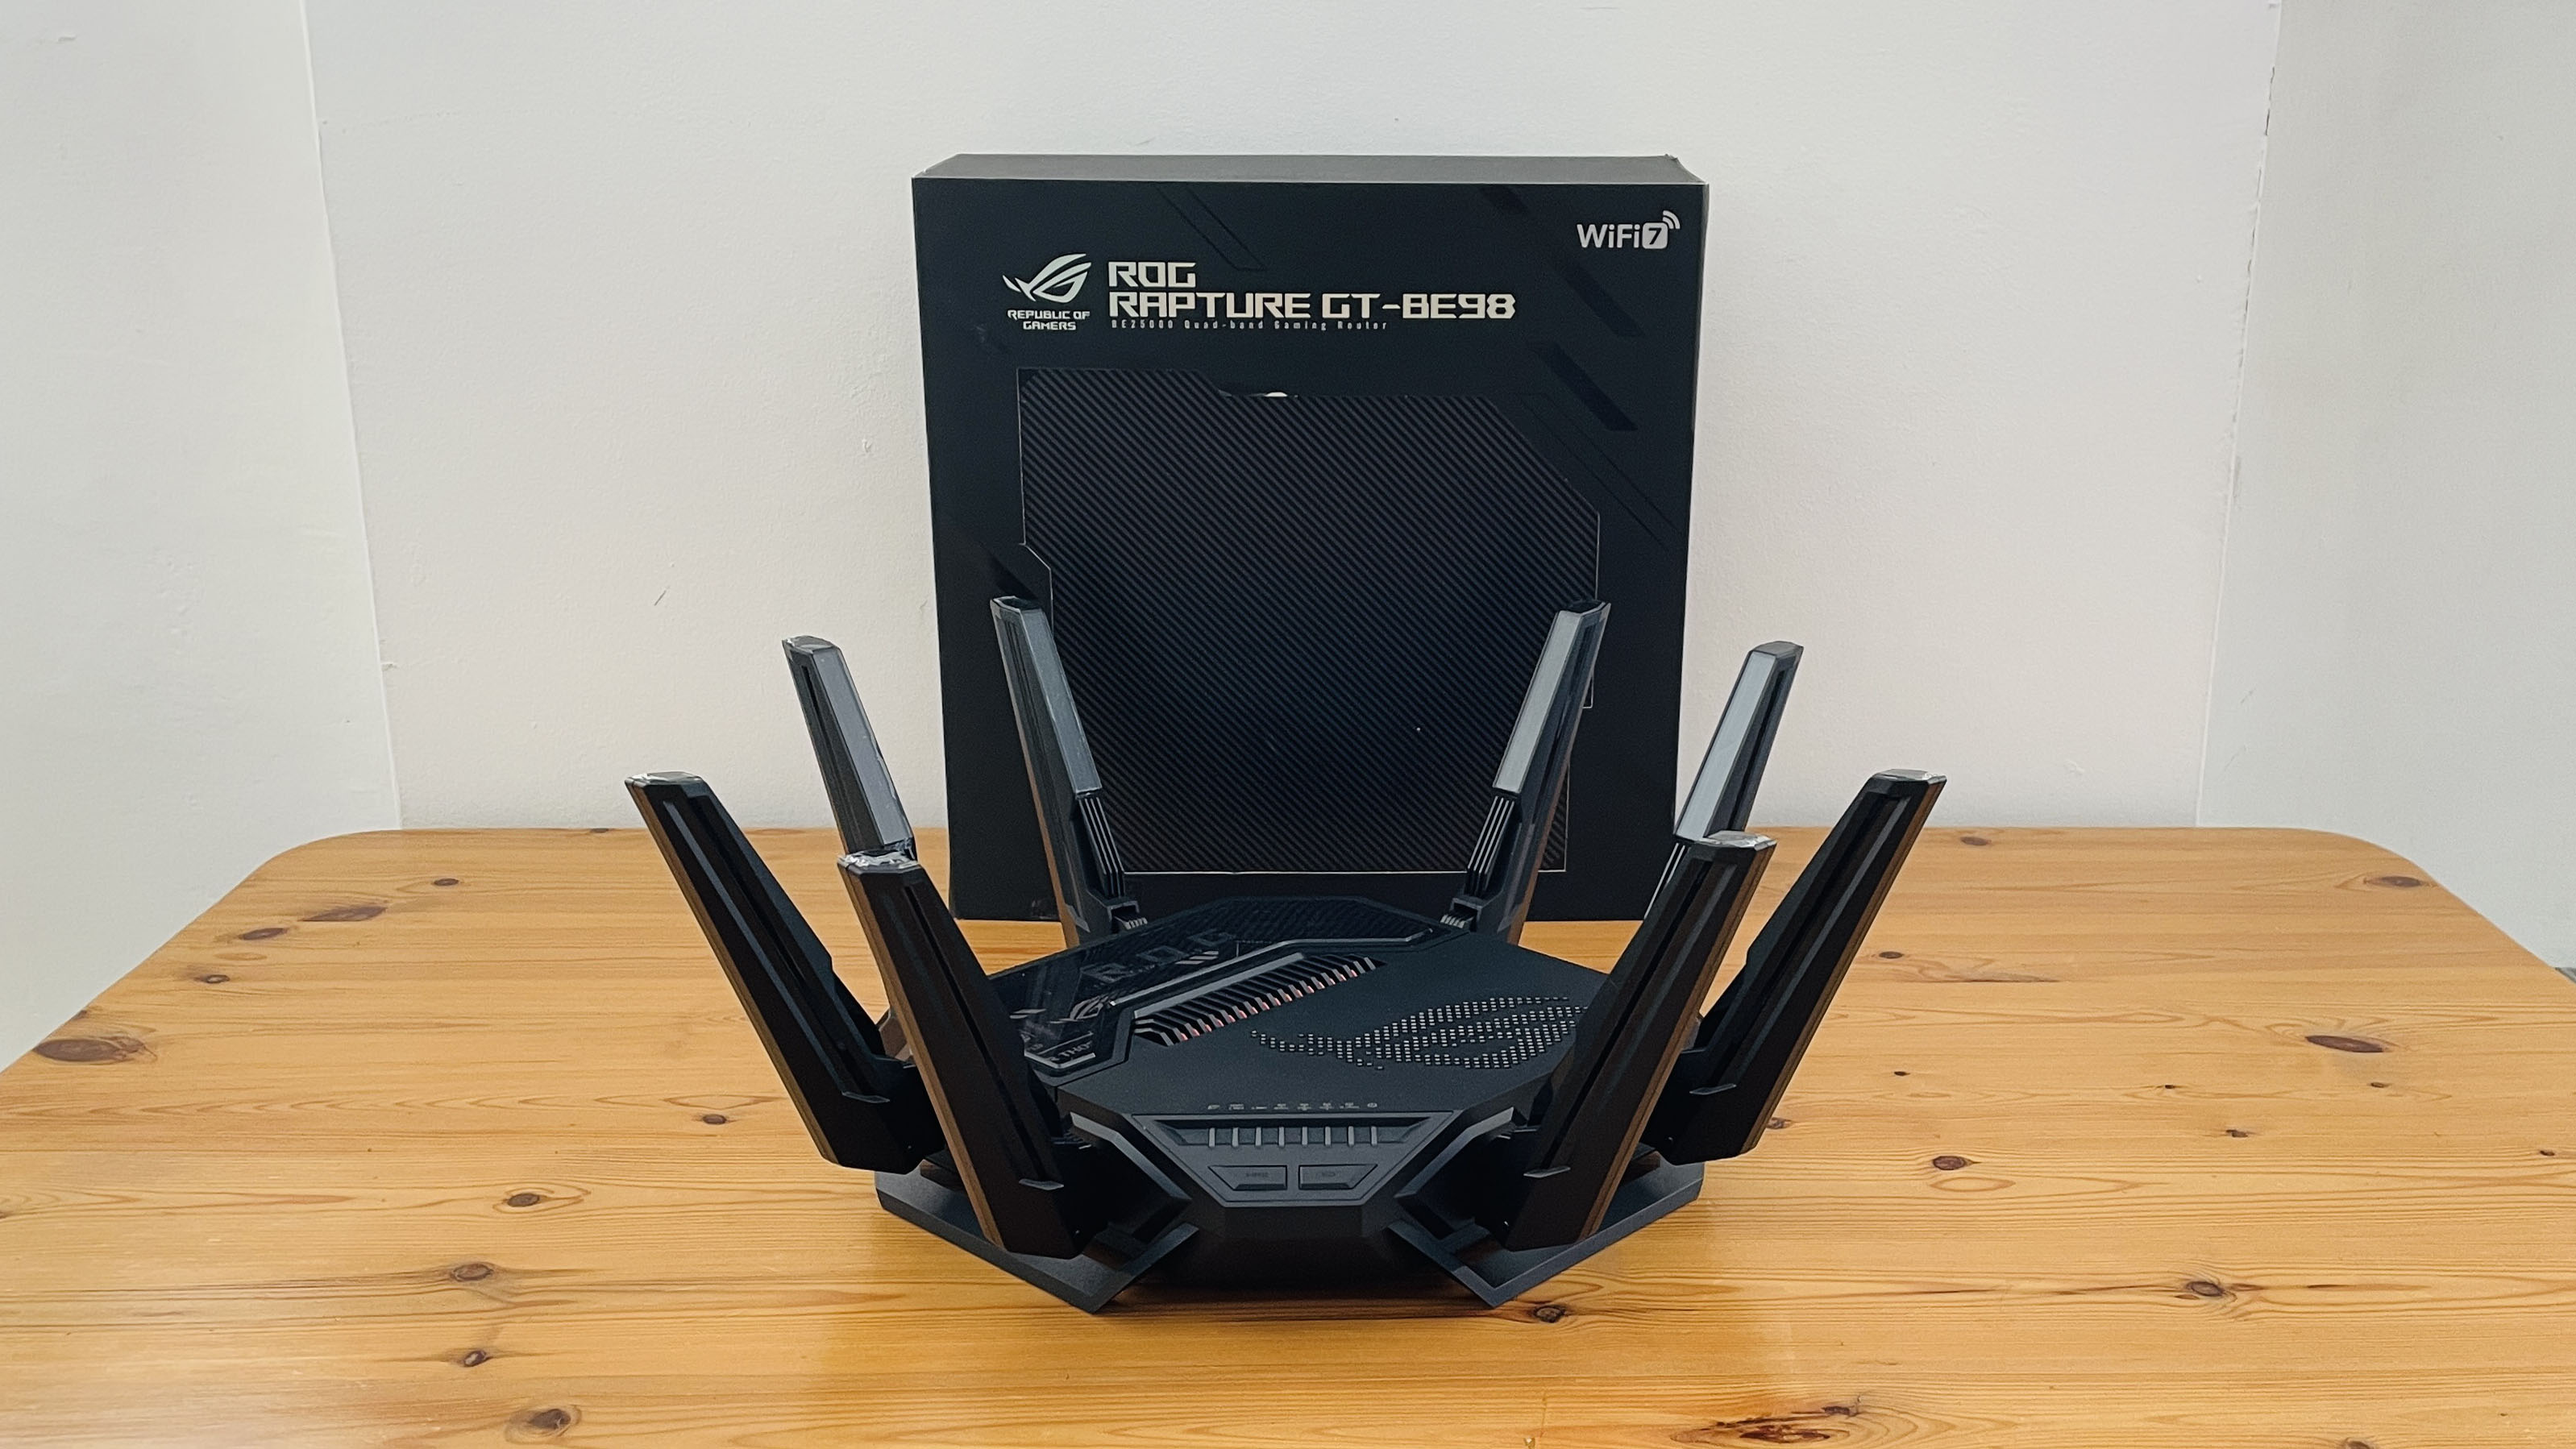 Asus ROG Rapture GT-BE98: lightning-fast Wi-Fi 7 router with impressive features for hardcore gamers